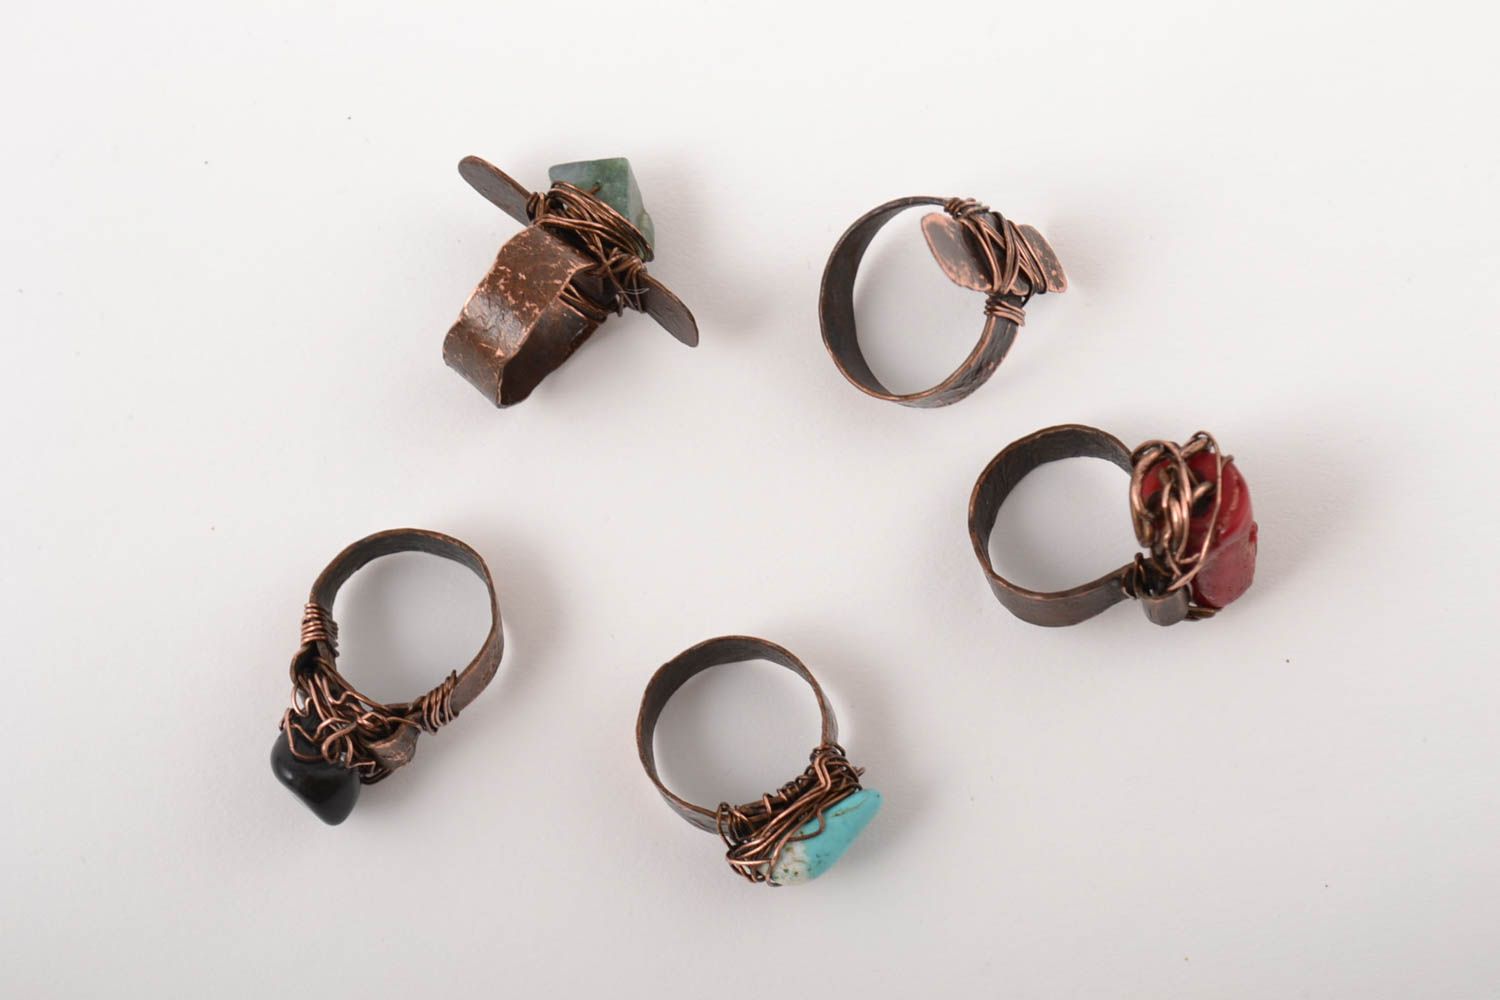 Handmade ring set of 5 items gift ideas unusual accessory copper jewelry  photo 3